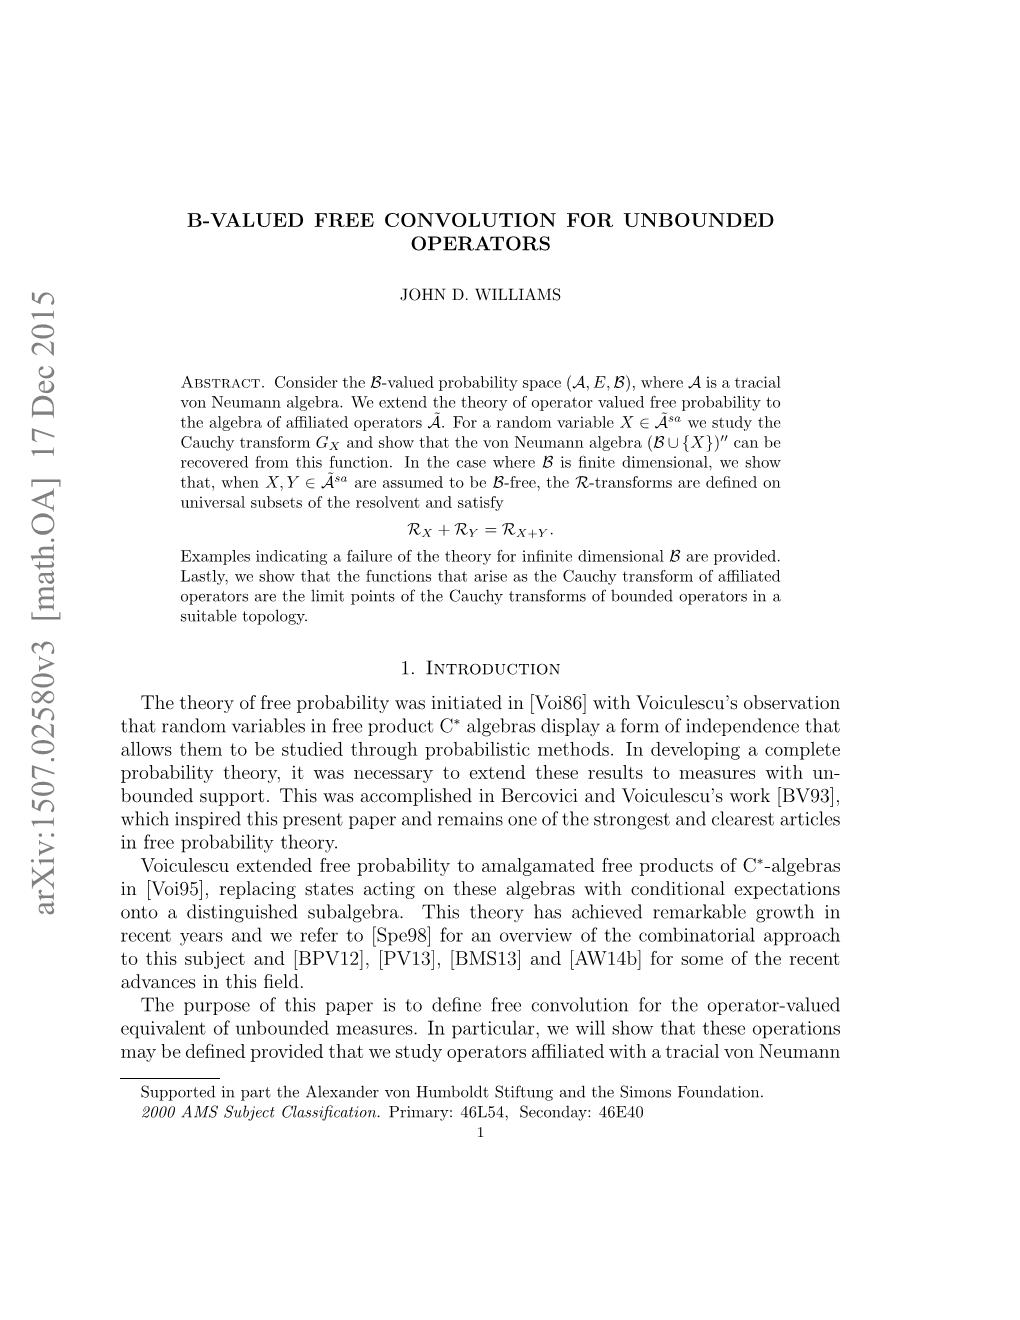 B-Valued Free Convolution for Unbounded Operators 3